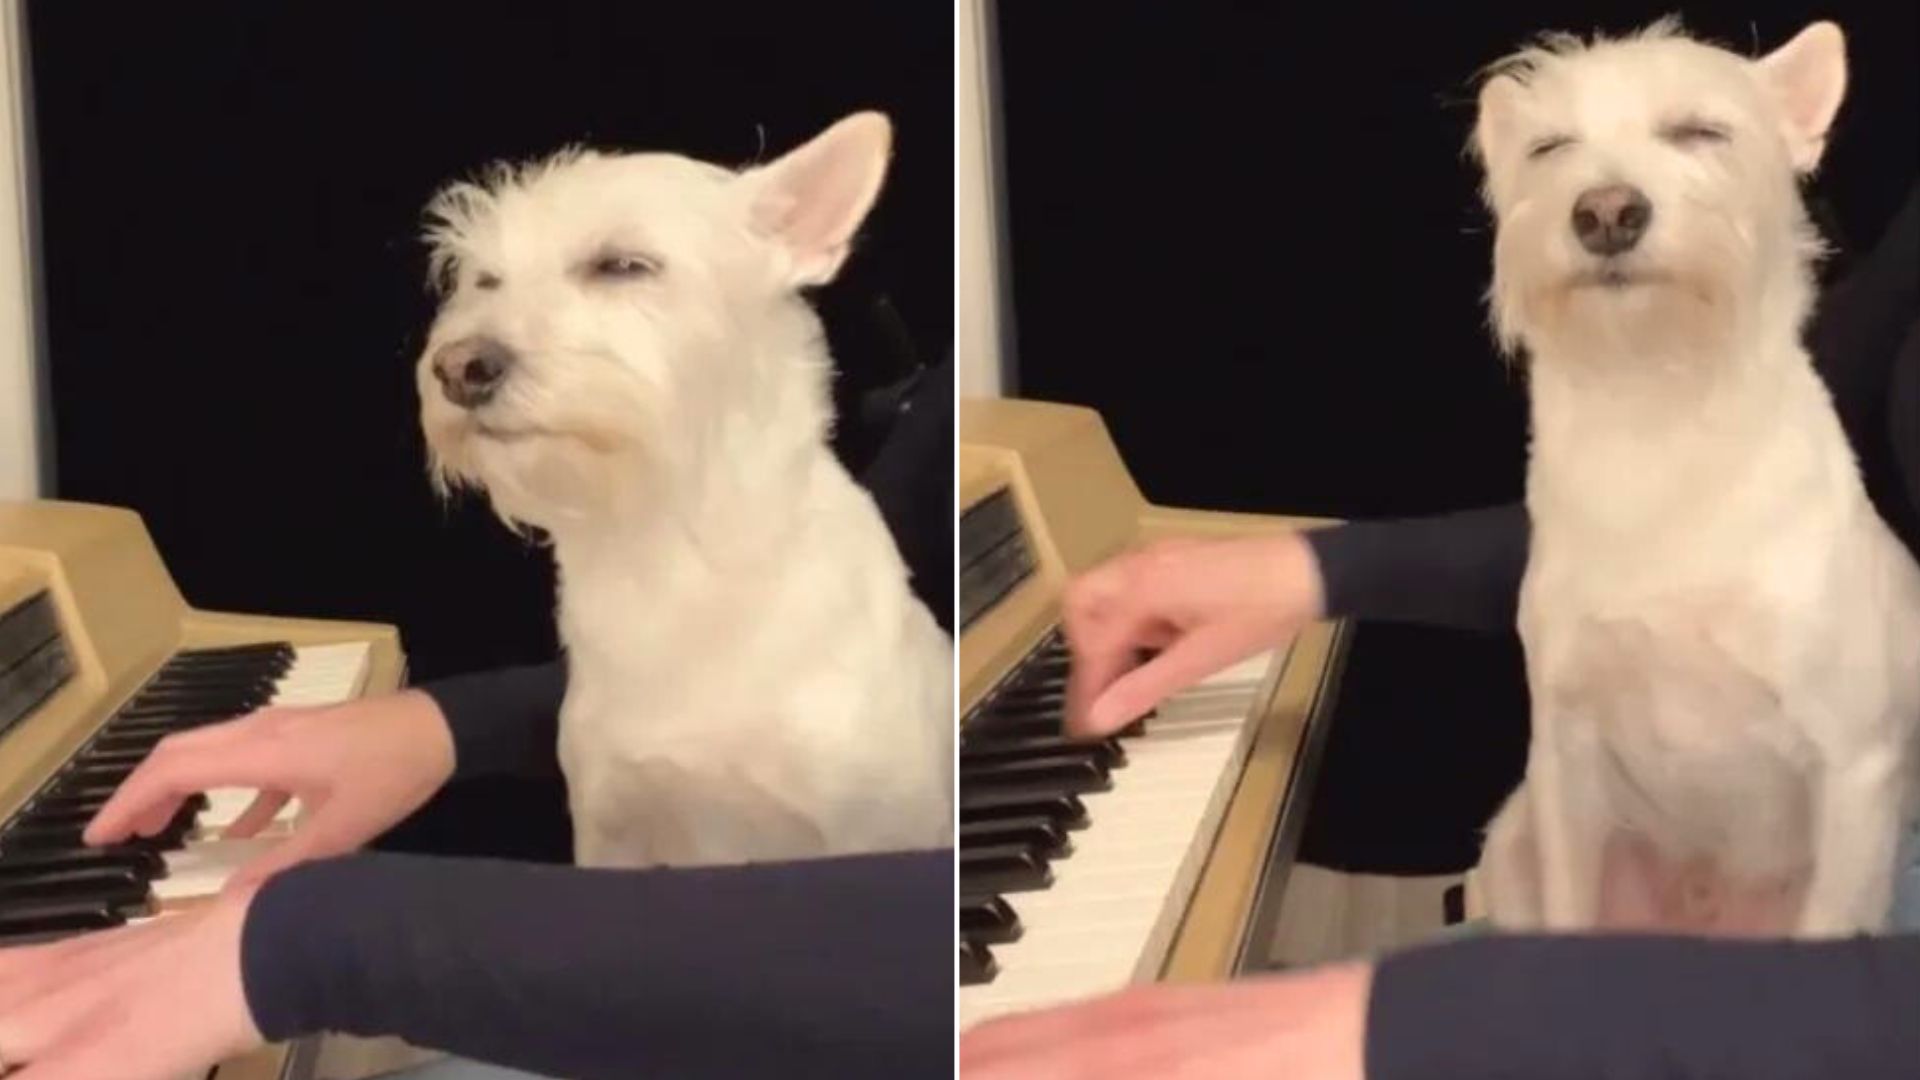 This Musician Loves To Create Music On A Jazz Piano While Her Dog Sits In Her Lap